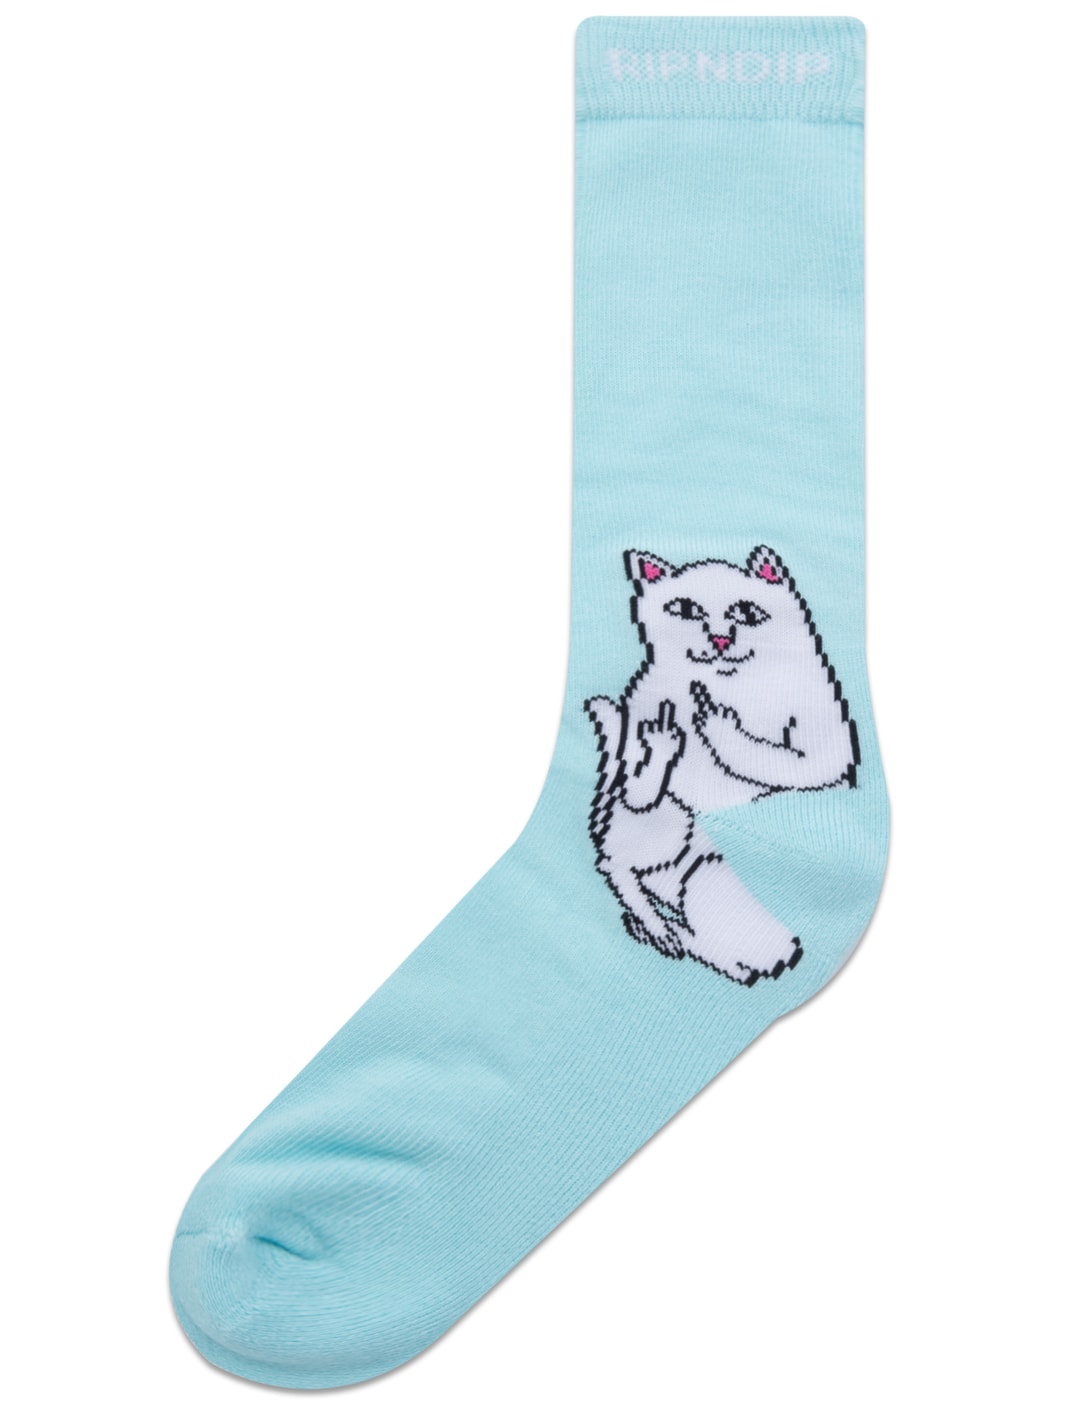 RIPNDIP - Lord Nermal Socks | HBX - Globally Curated Fashion and ...